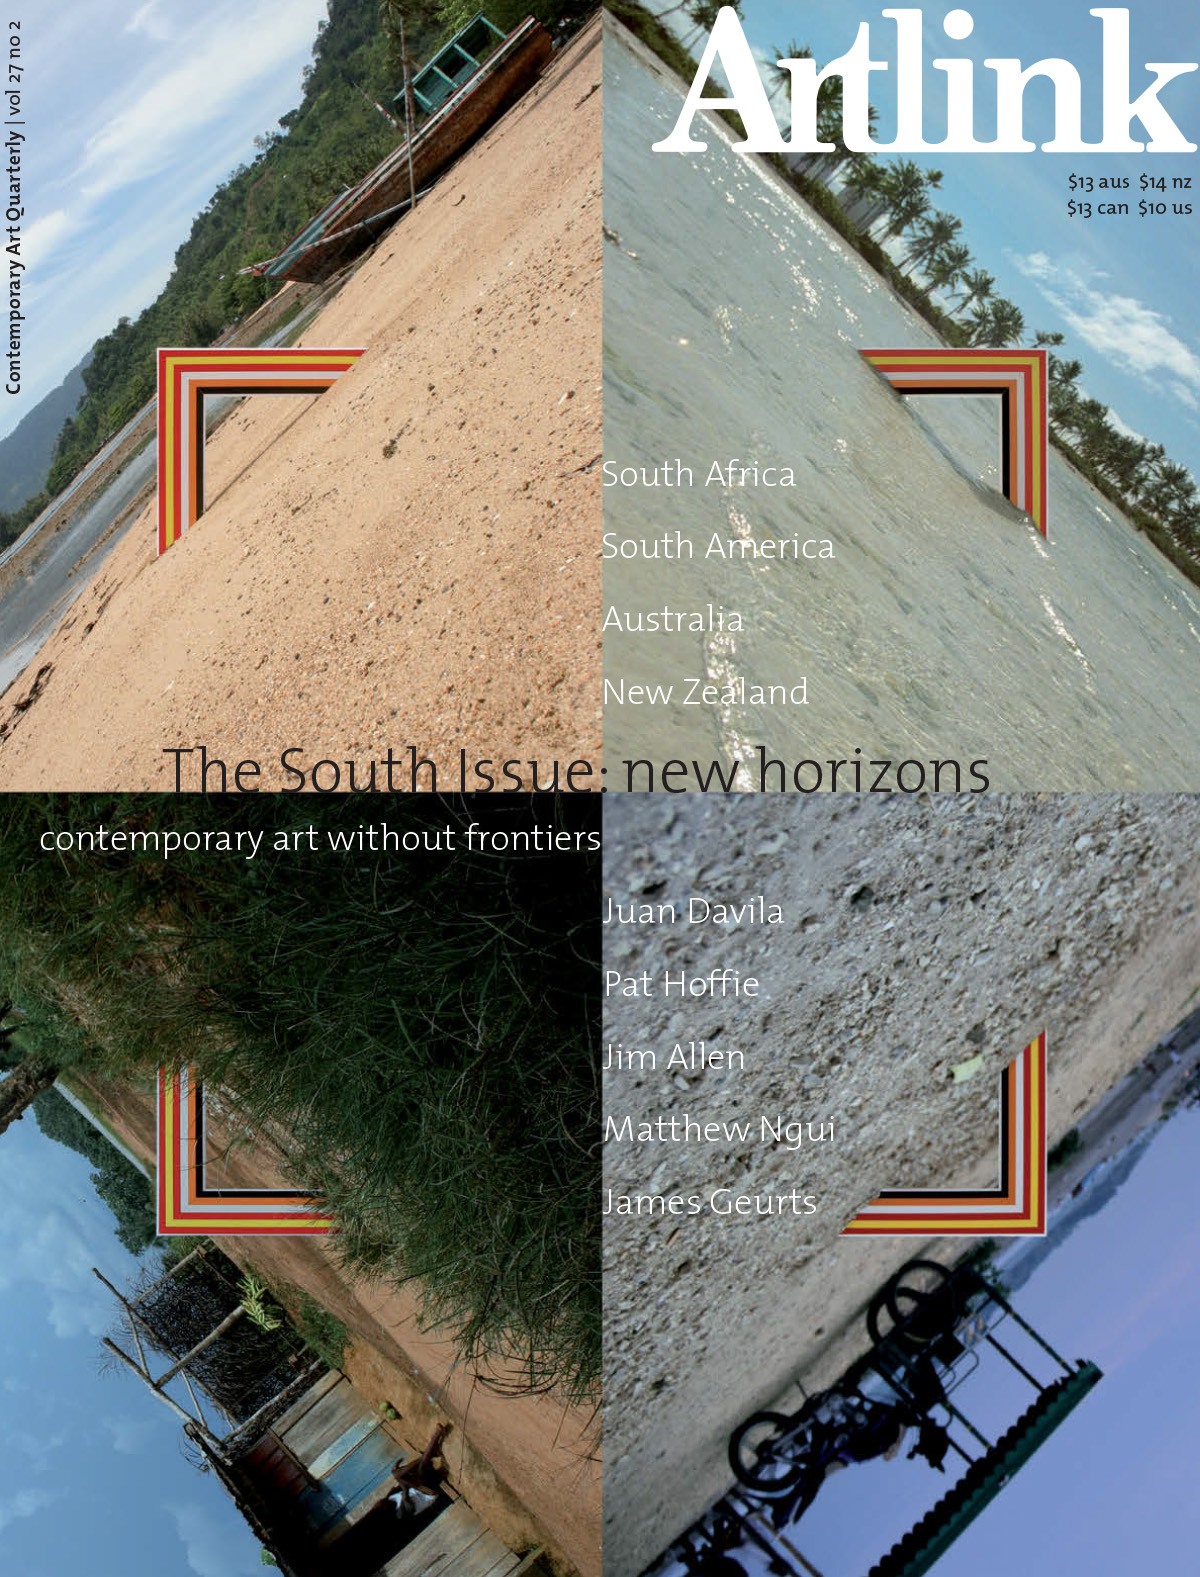 Issue 27:2 | June 2007 | The South Issue: New Horizons